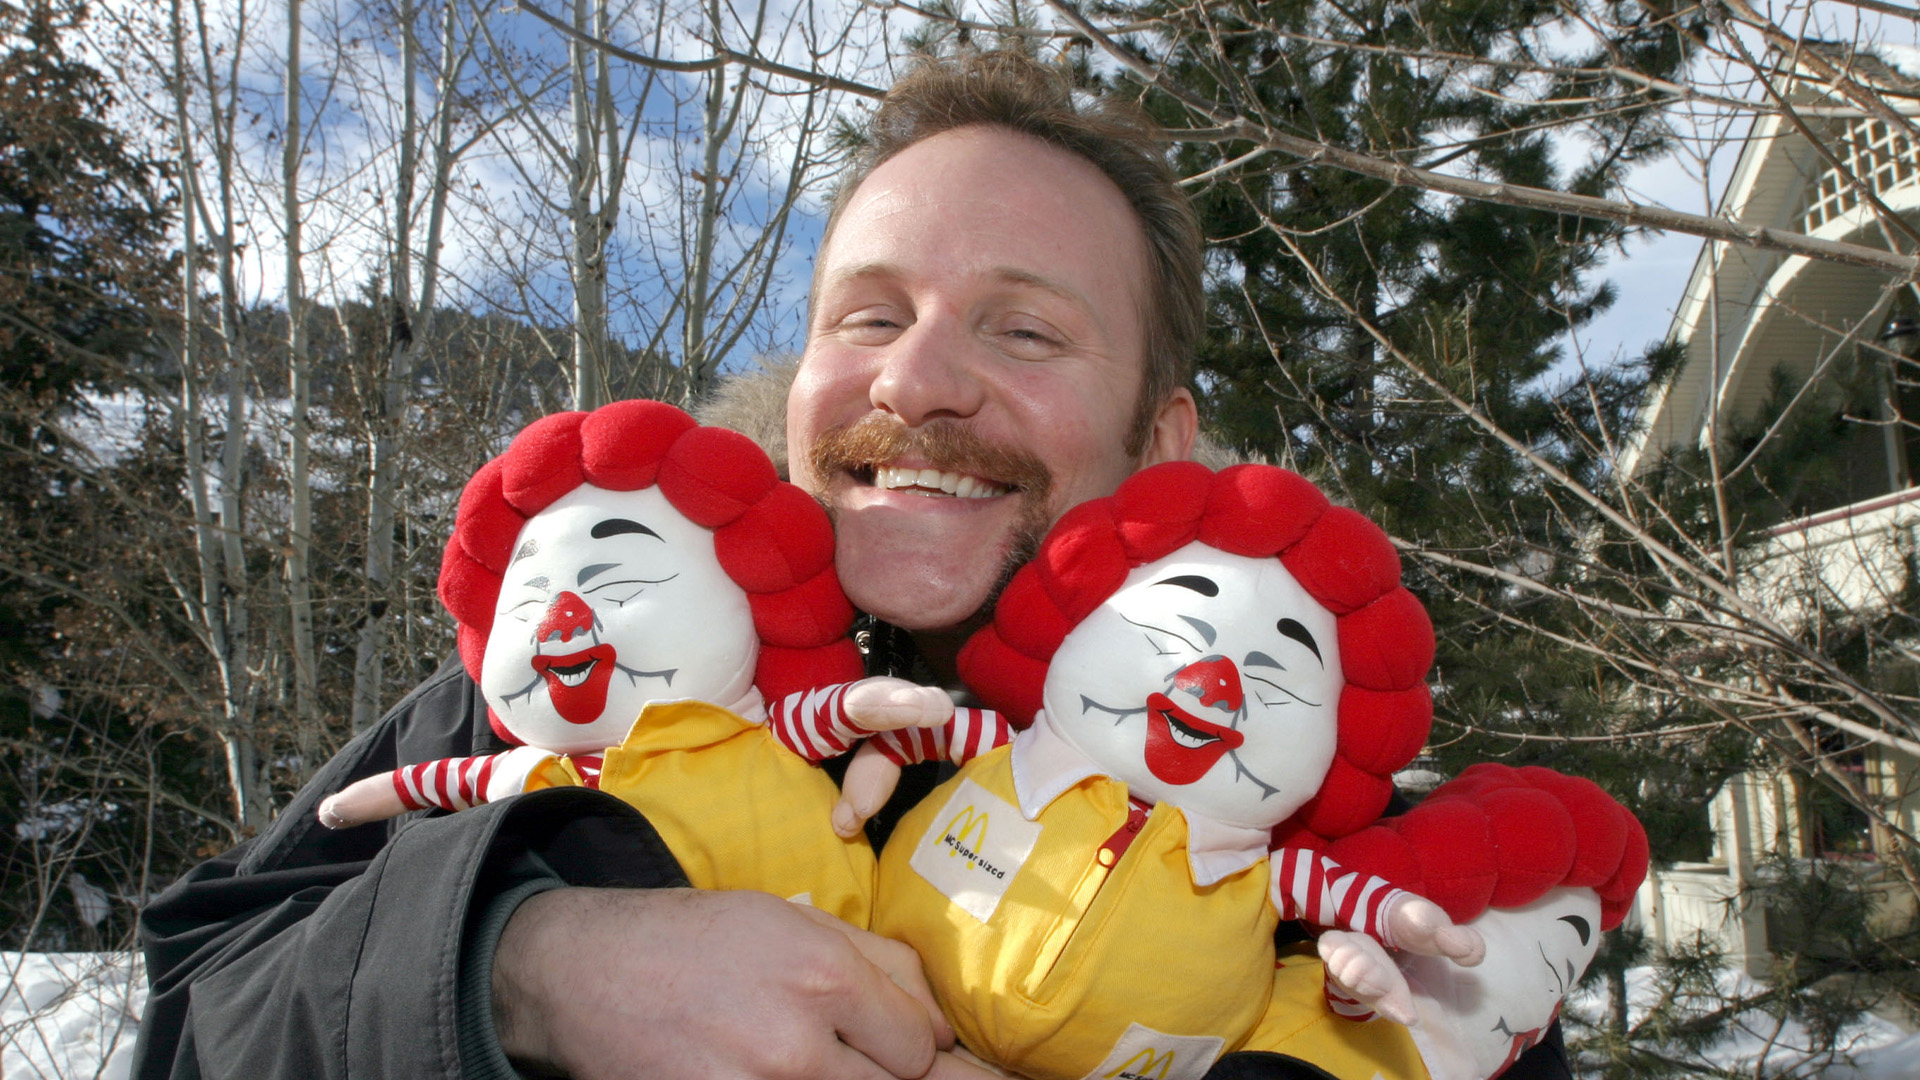 Morgan Spurlock who ate McDonalds every day for a month for Super Size Me documentary dies at age 53 [Video]